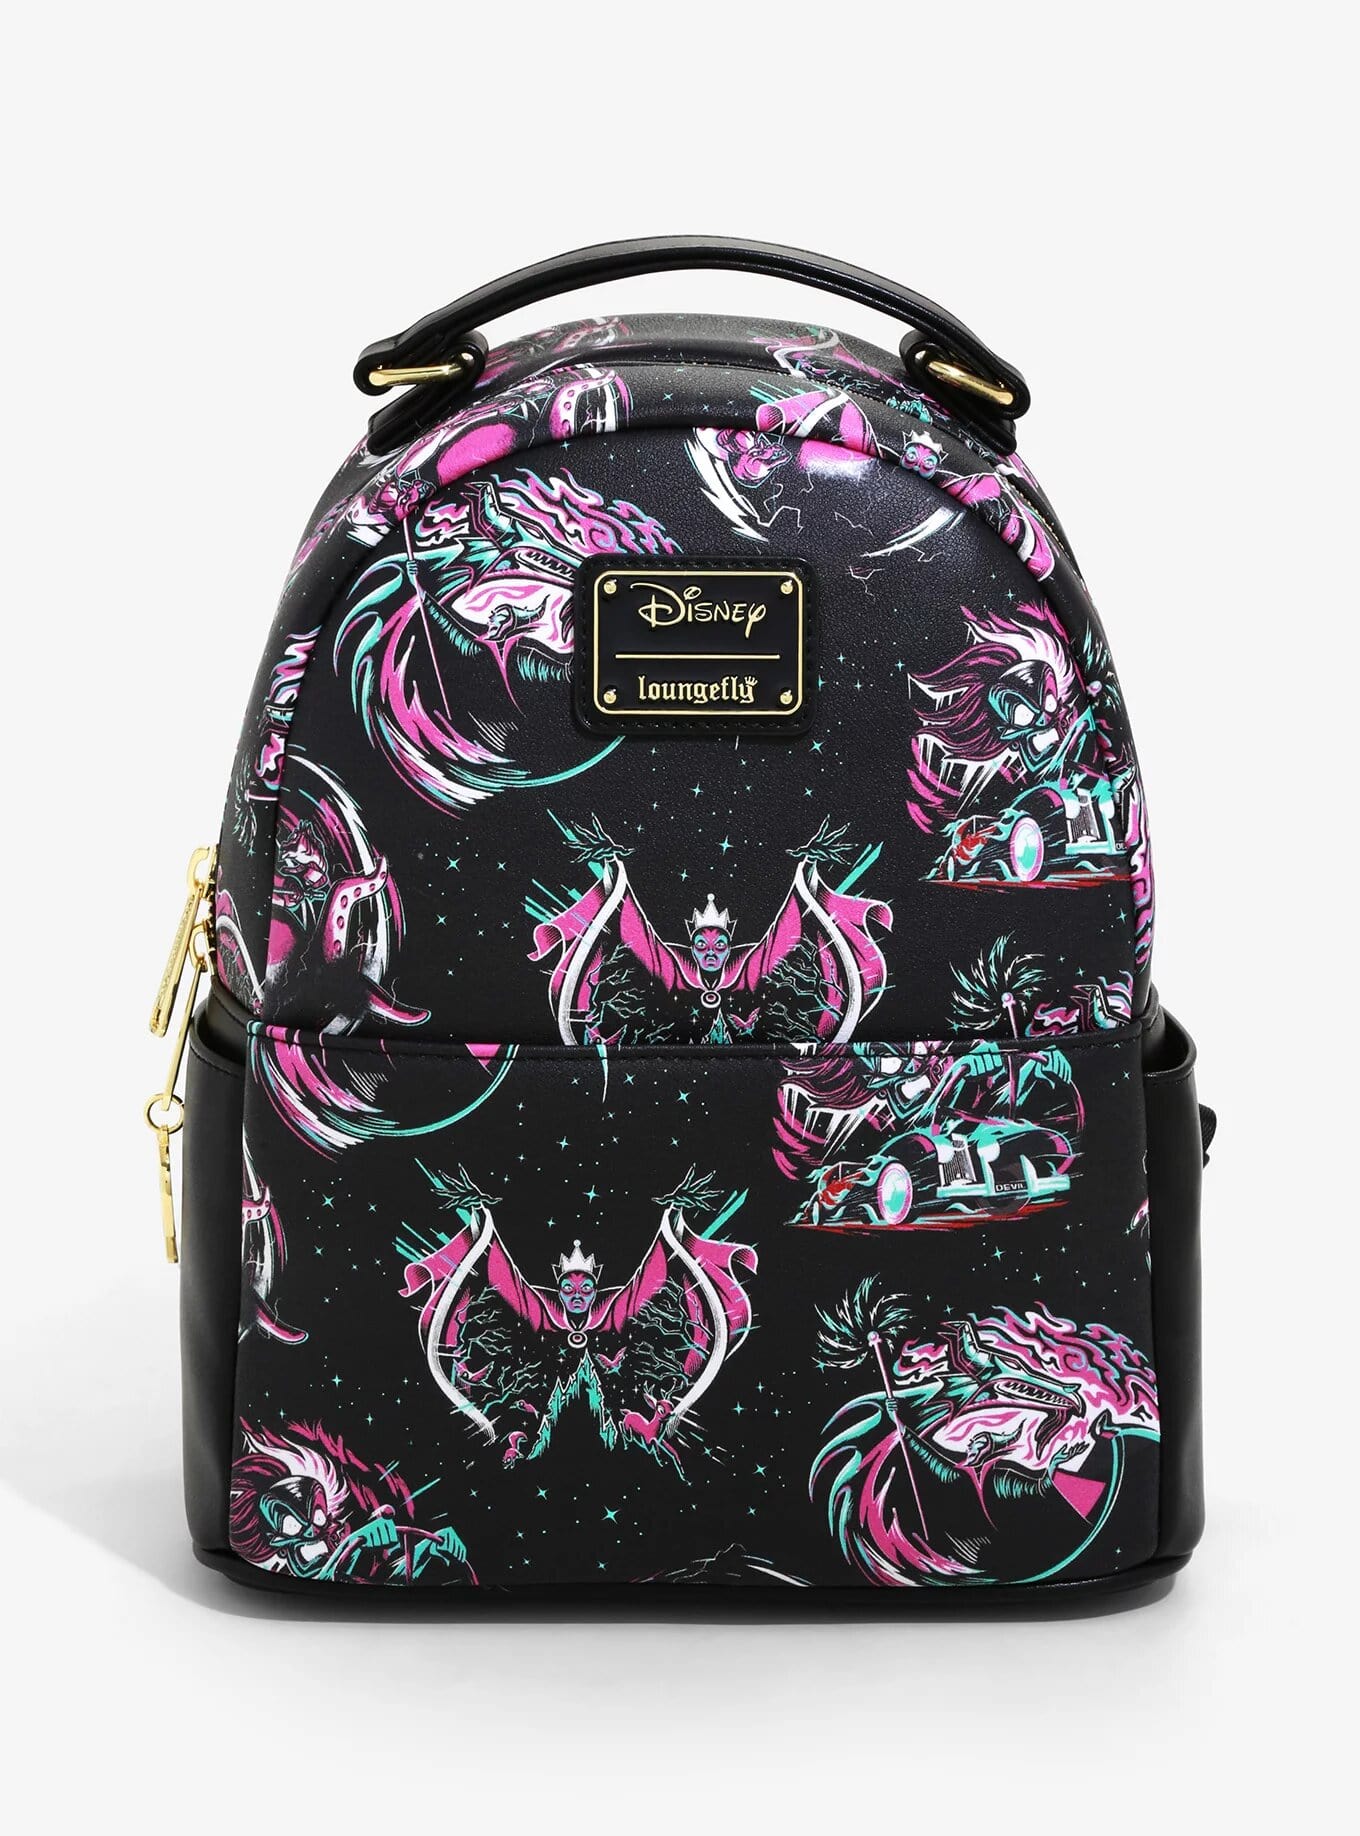 Get Grungy With This New Disney Villains Loungefly Backpack! the